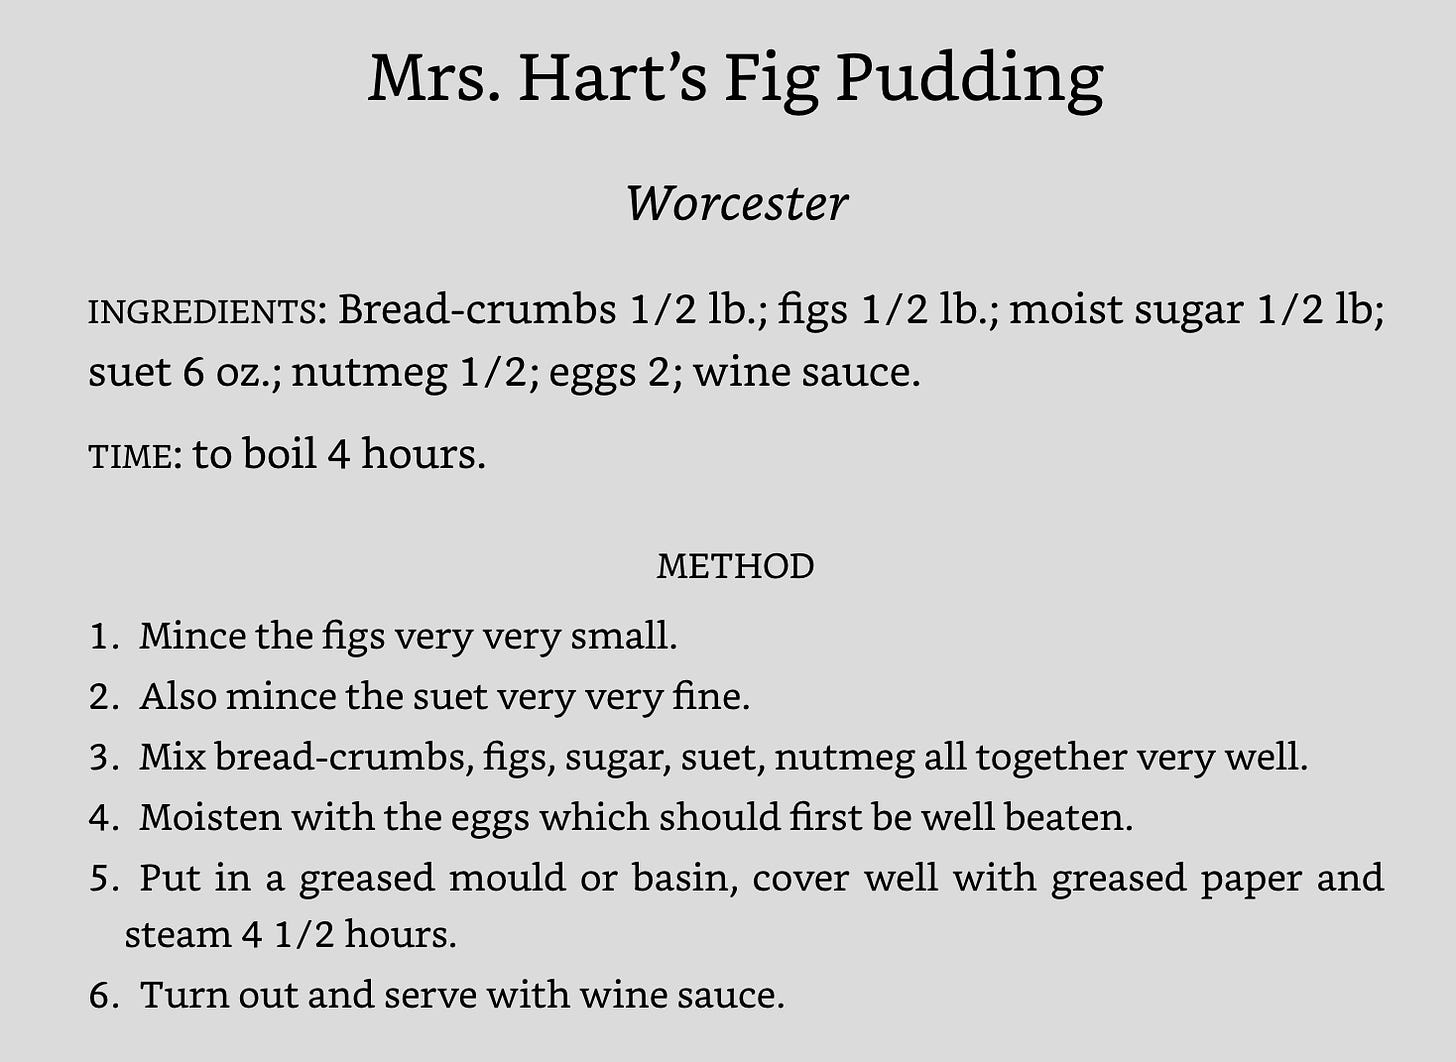 Mrs. Hart’s Fig Pudding Worcester INGREDIENTS: Bread-crumbs 1/2 lb.; figs 1/2 lb.; moist sugar 1/2 lb; suet 6 oz.; nutmeg 1/2; eggs 2; wine sauce. TIME: to boil 4 hours. METHOD 1.​Mince the figs very very small. 2.​Also mince the suet very very fine. 3.​Mix bread-crumbs, figs, sugar, suet, nutmeg all together very well. 4.​Moisten with the eggs which should first be well beaten. 5.​Put in a greased mould or basin, cover well with greased paper and steam 4 1/2 hours. 6.​Turn out and serve with wine sauce.